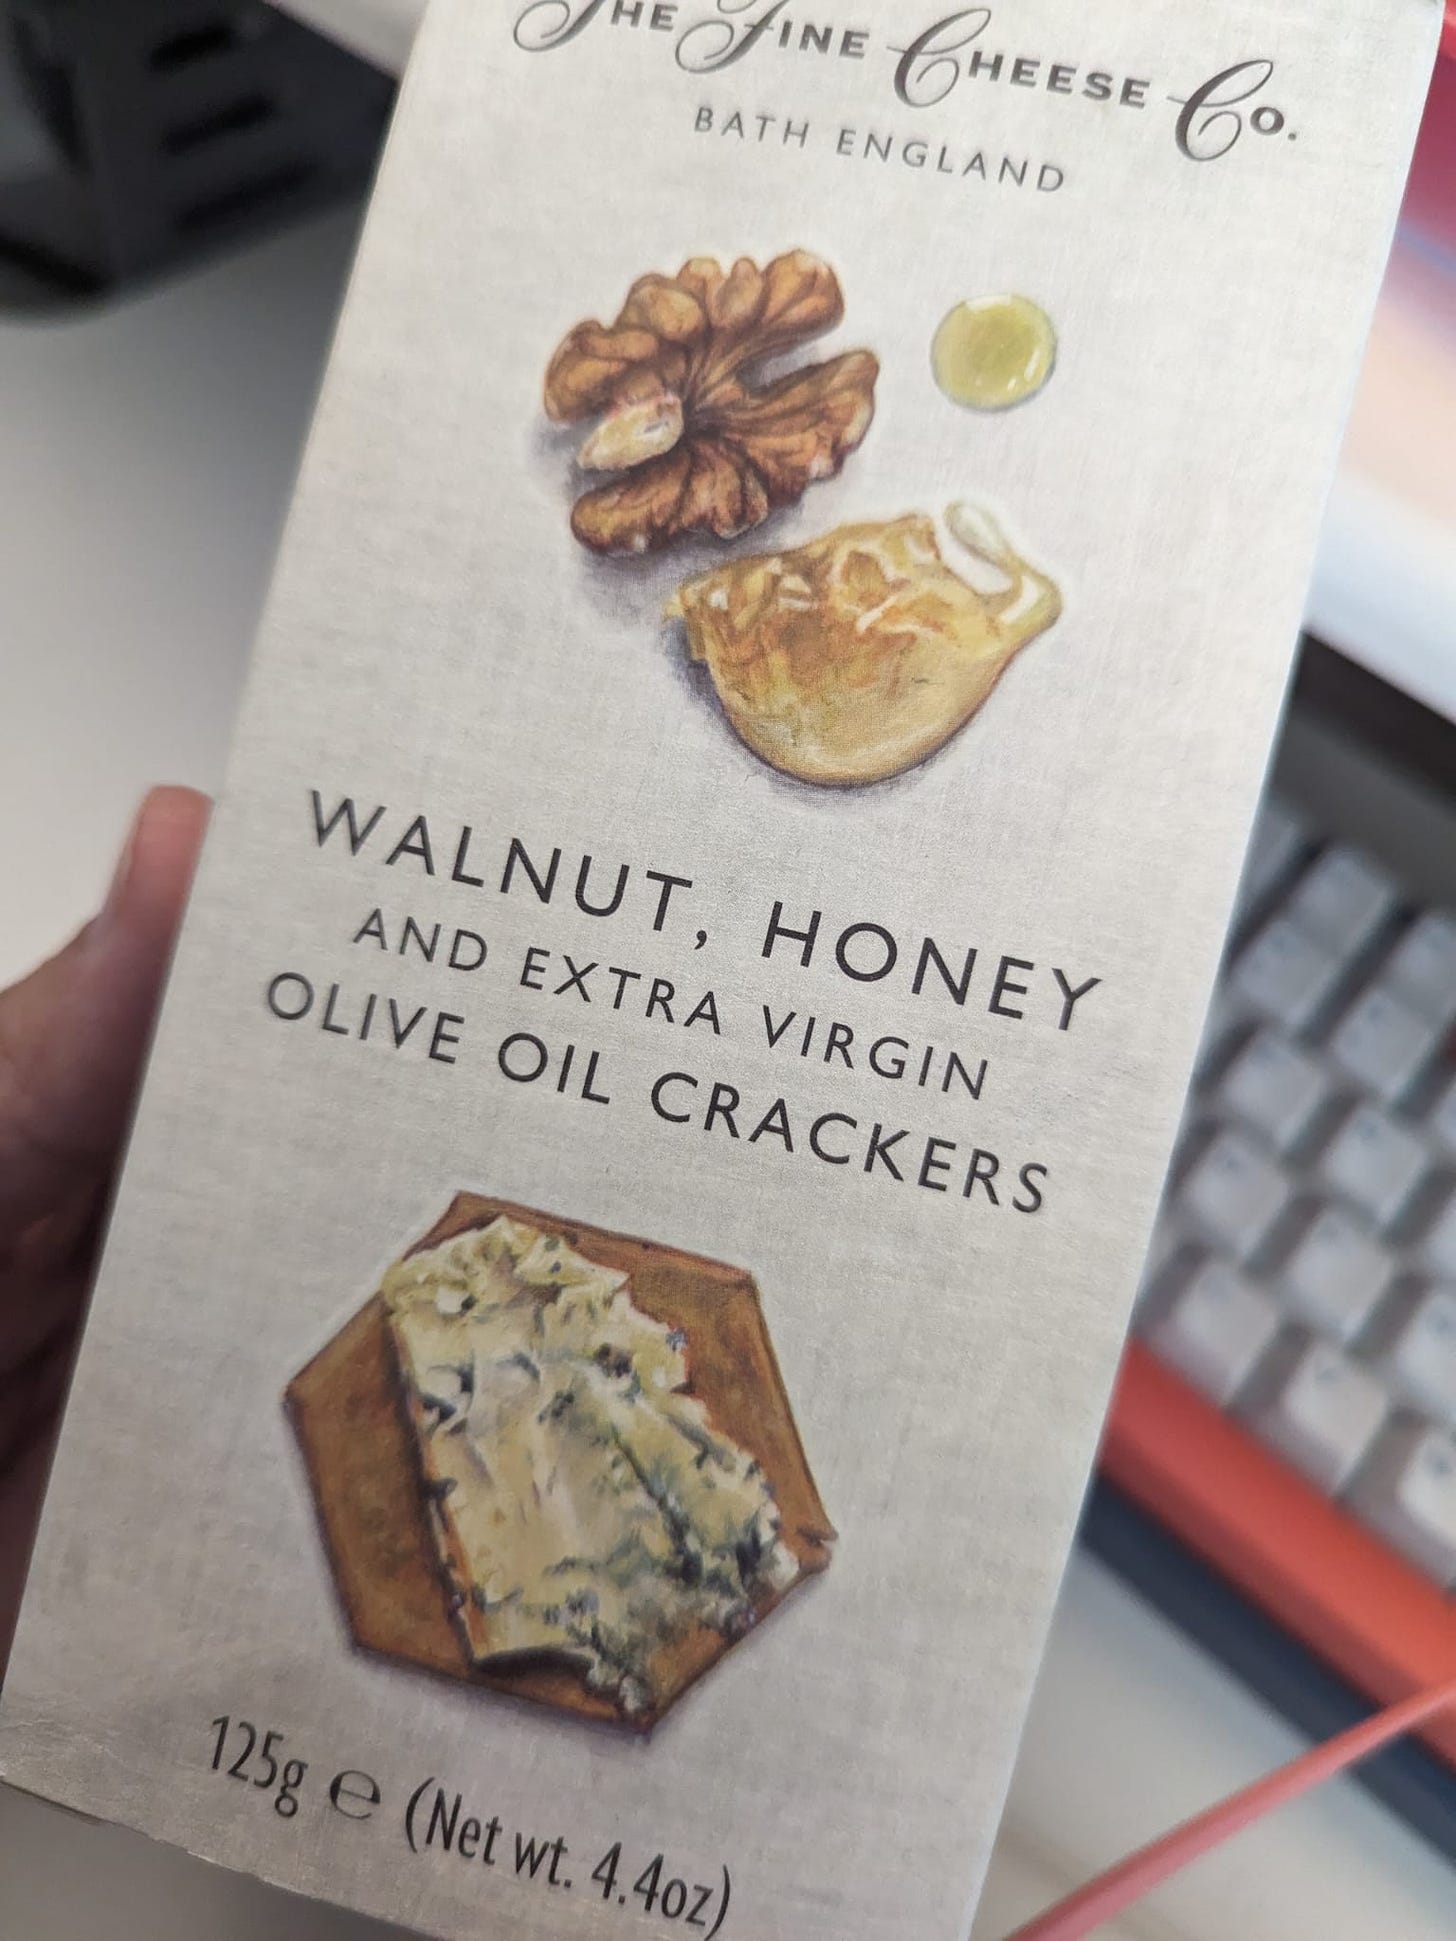 A box of Walnut, Honey and Extra Virgin Olive Oil Crackers by the Fine Cheese Co